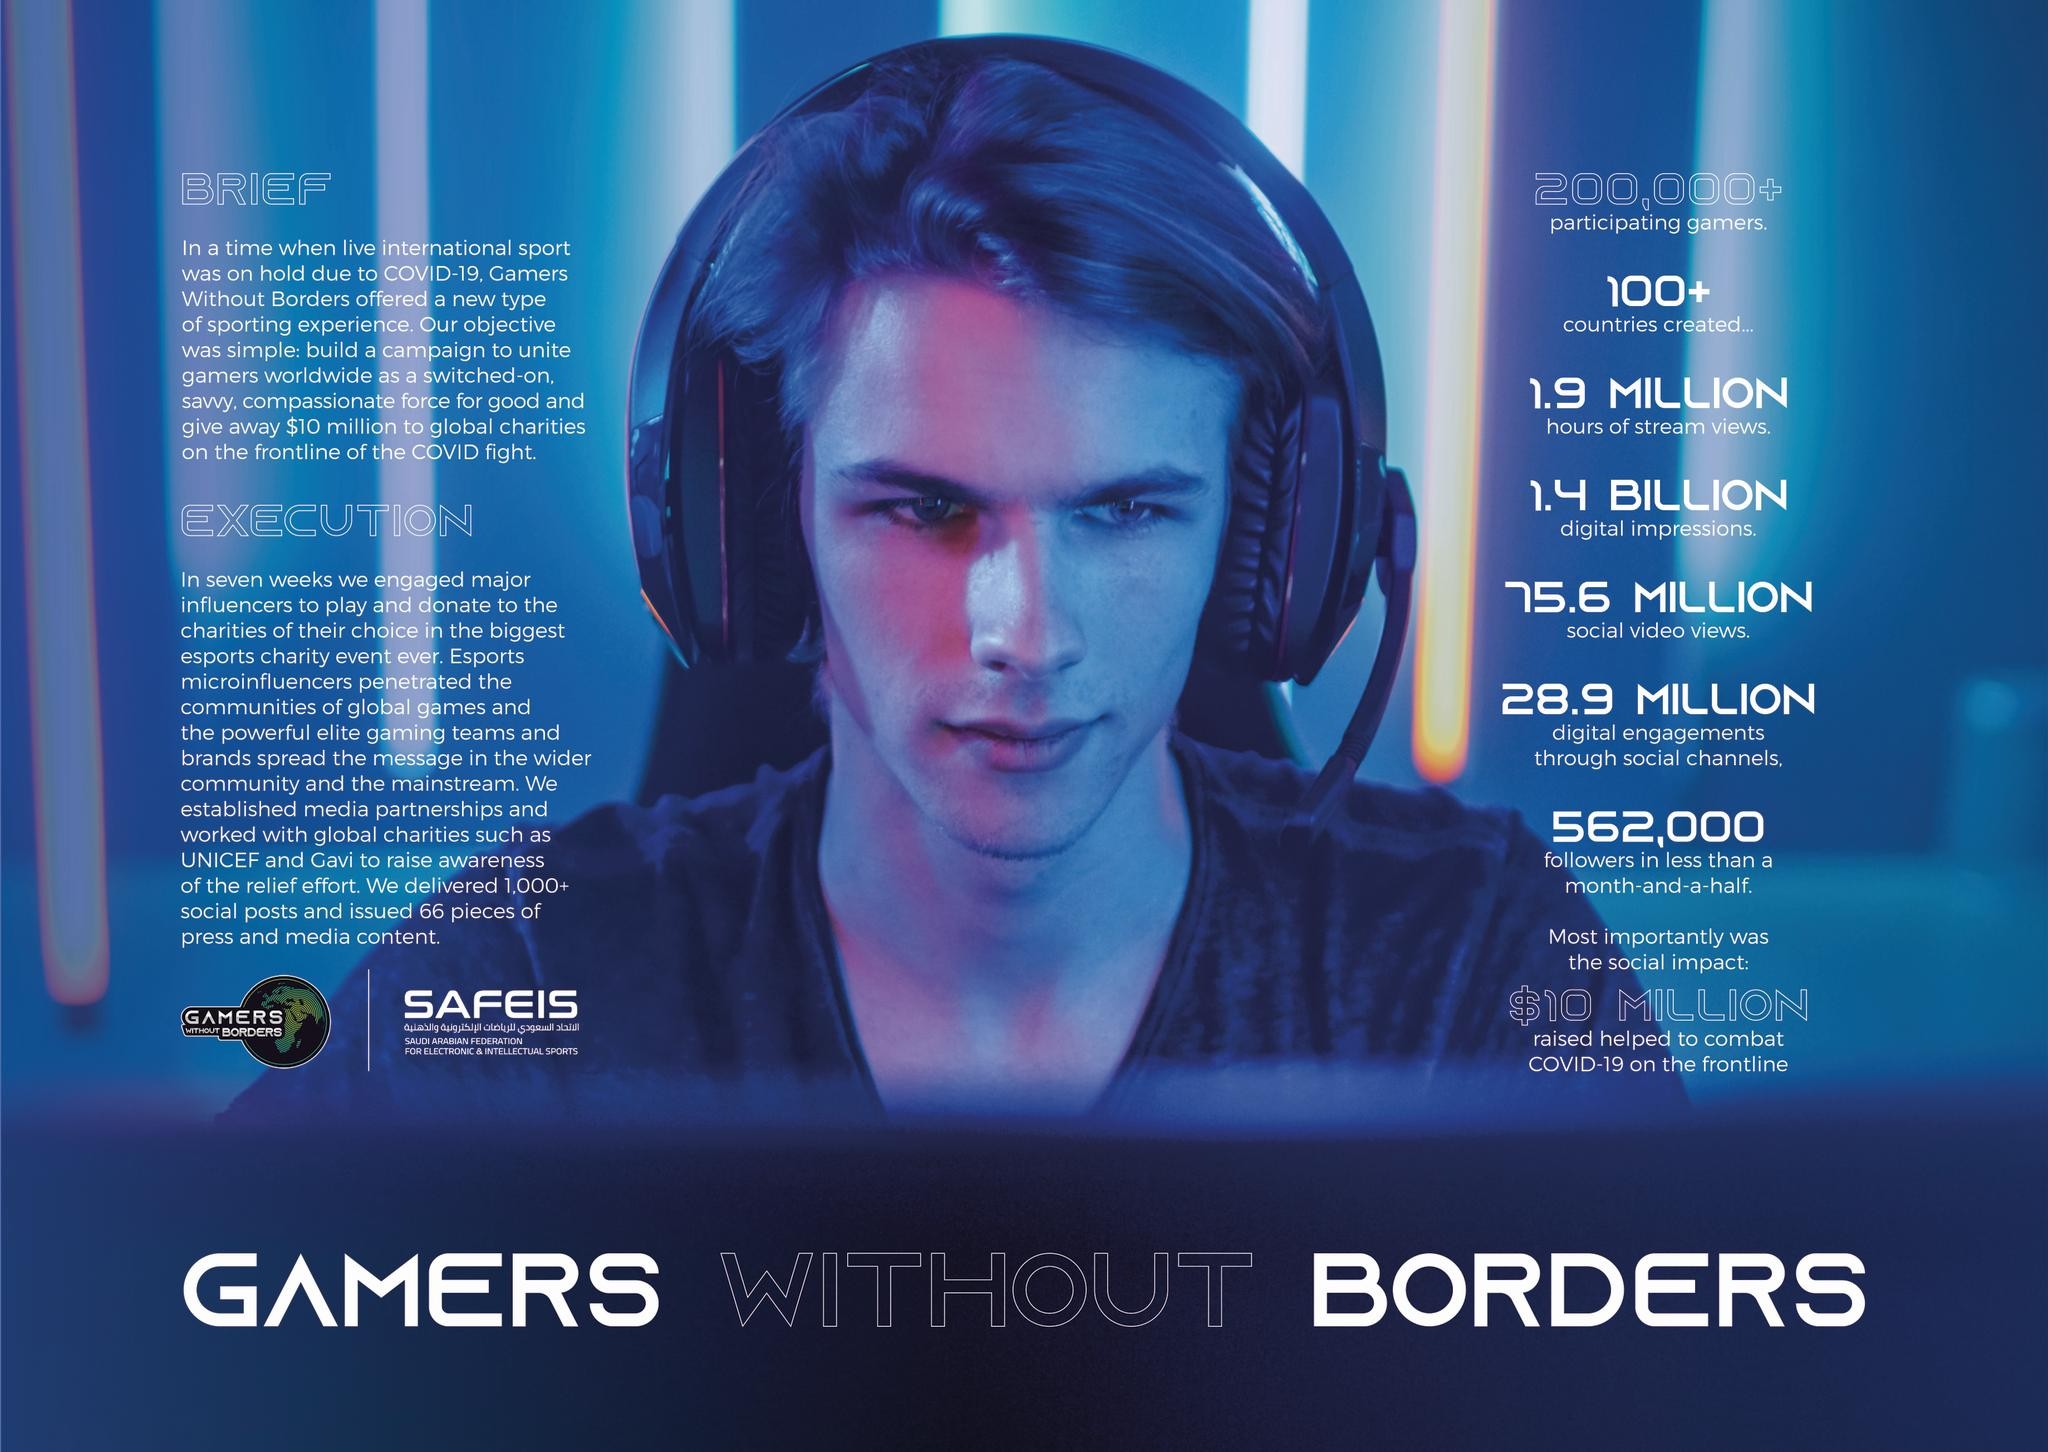 GAMERS WITHOUT BORDERS